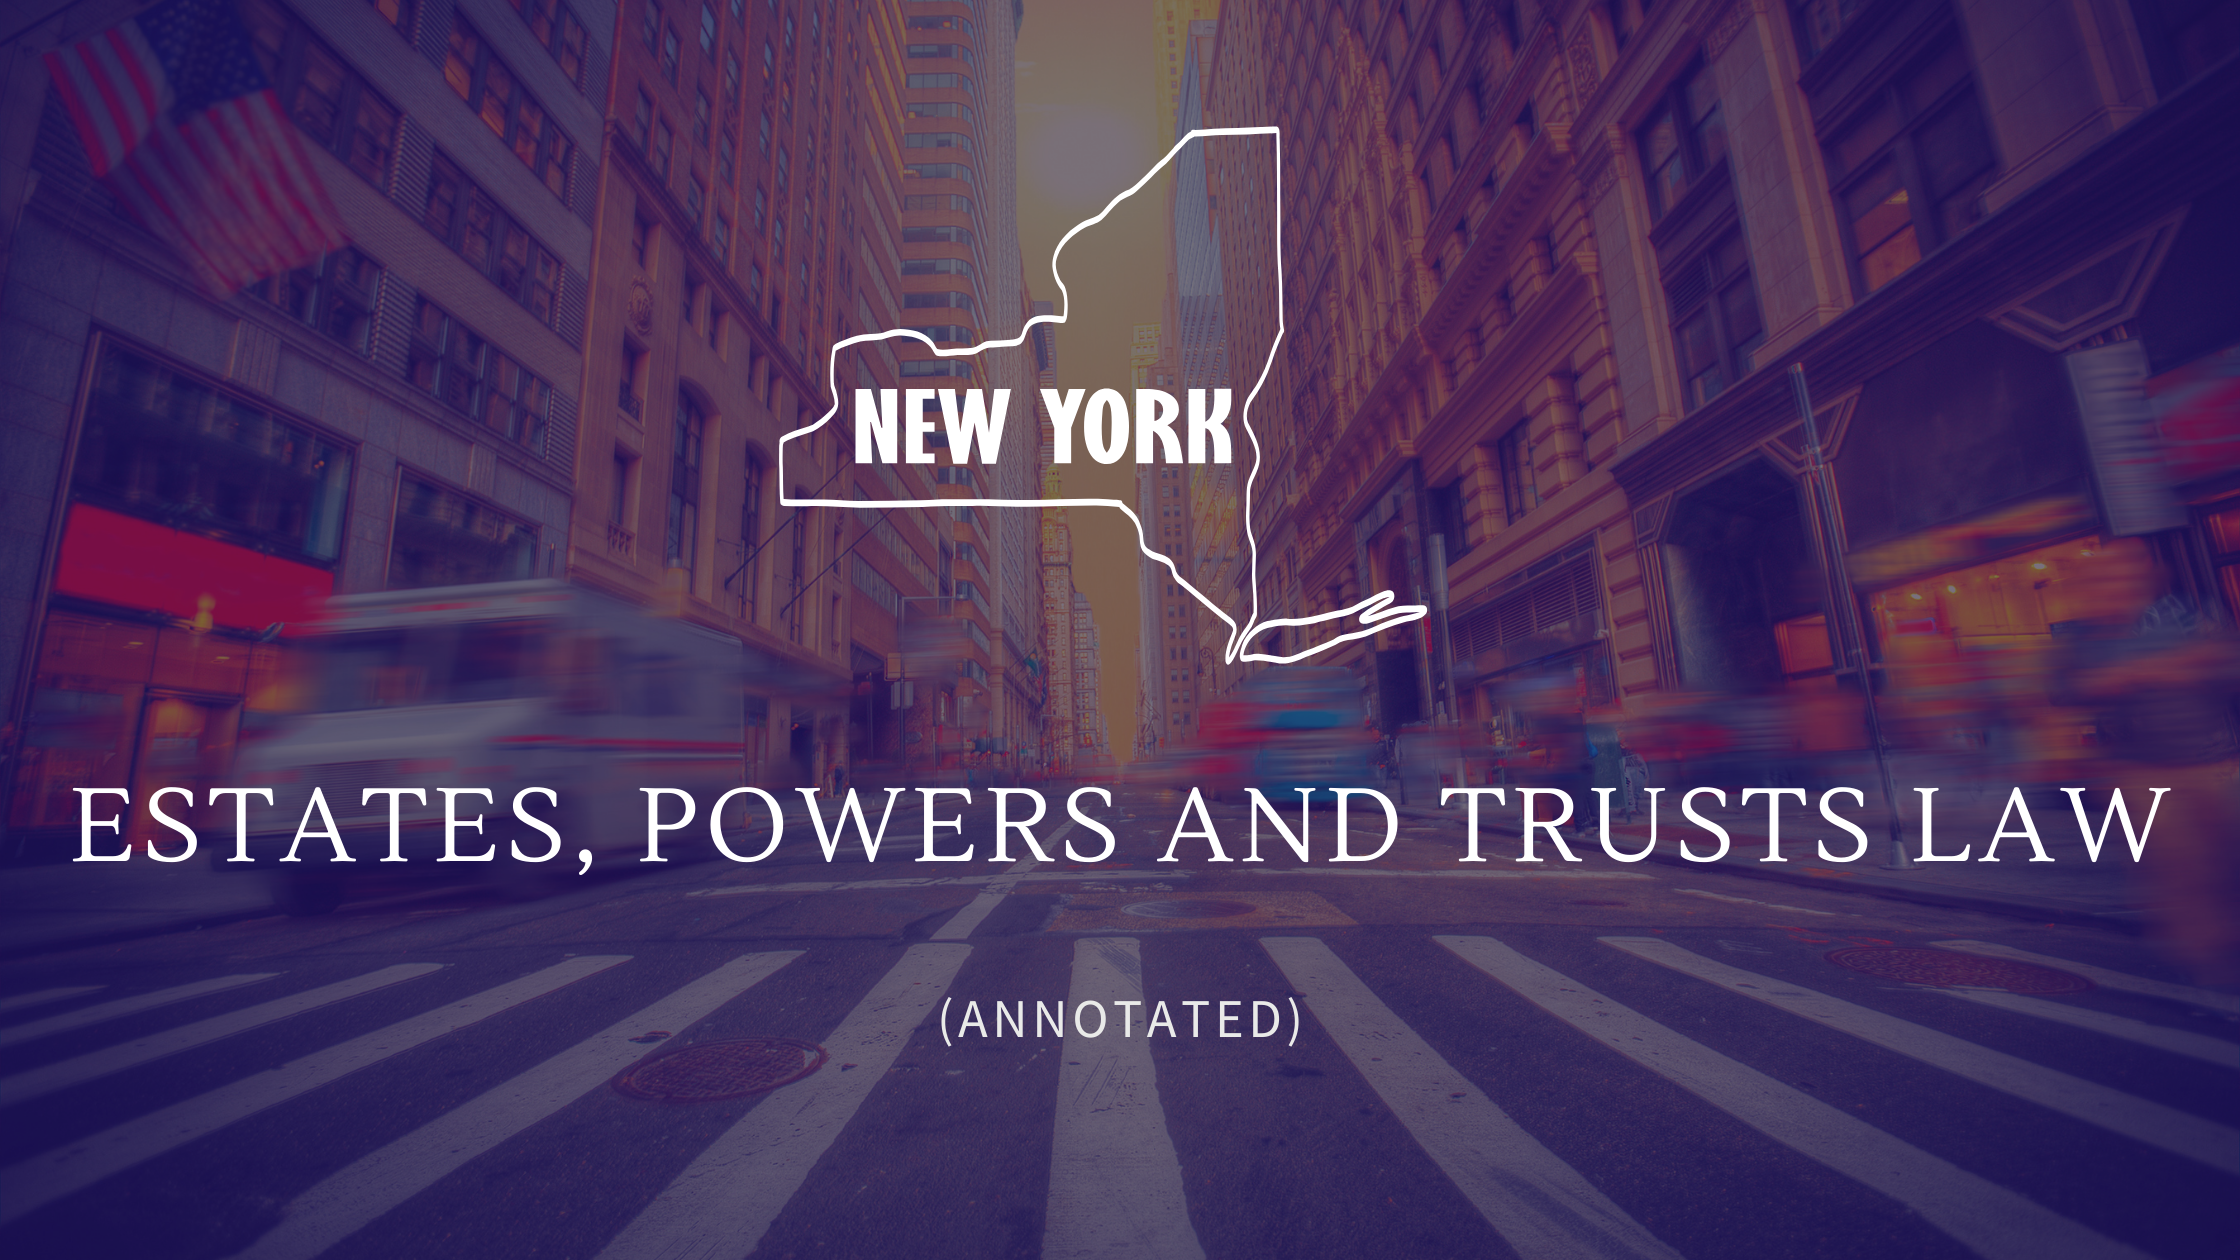 New York: Estates, Powers and Trusts Law (EPTL) - Annotated